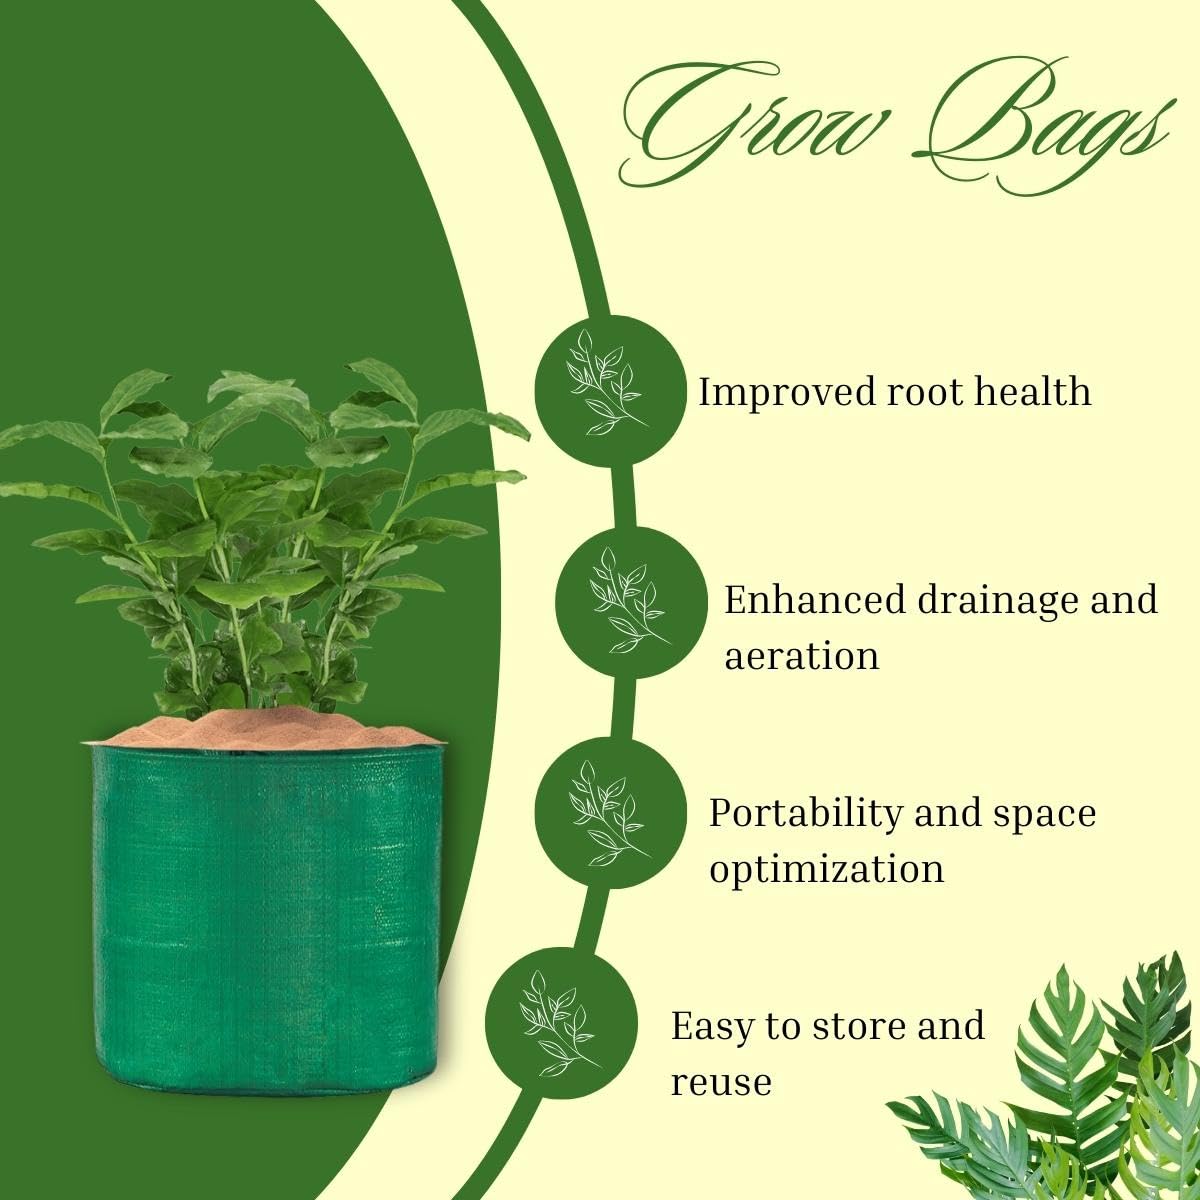 Green Grow Bags Size 9x9  to 24x24 Inch - Singhal Mart